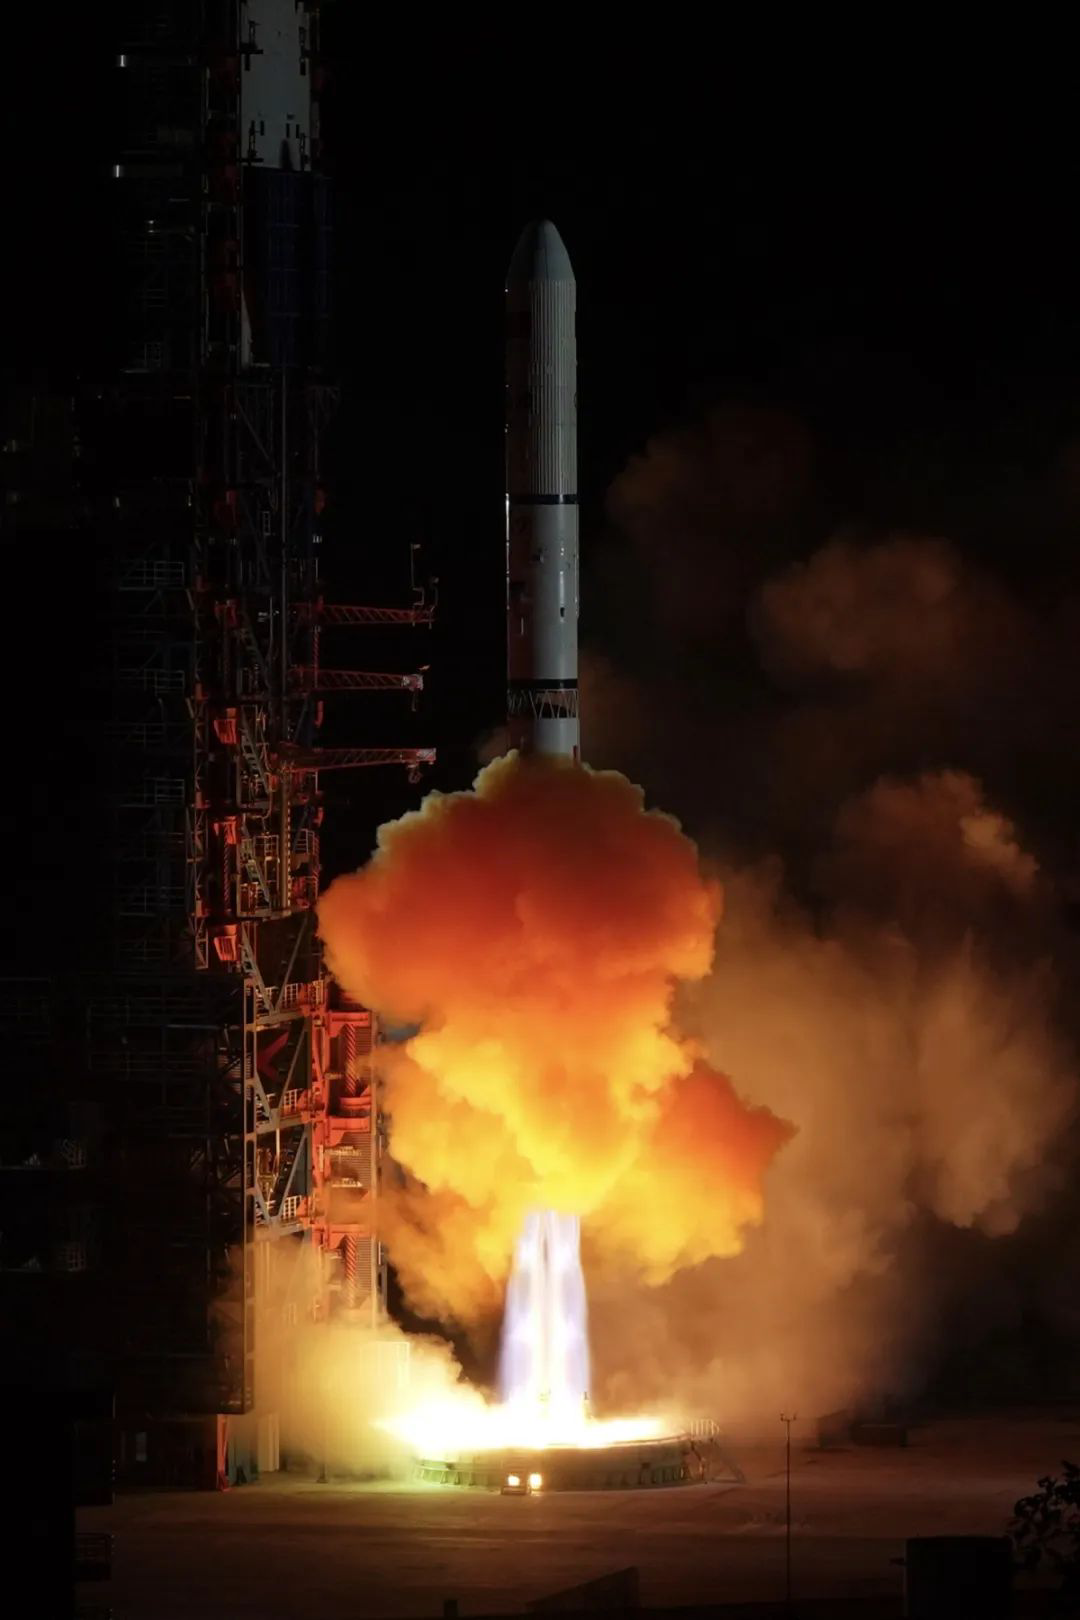 Long March 2D lifting off from its launch pad at Xichang Satellite Launch Center.